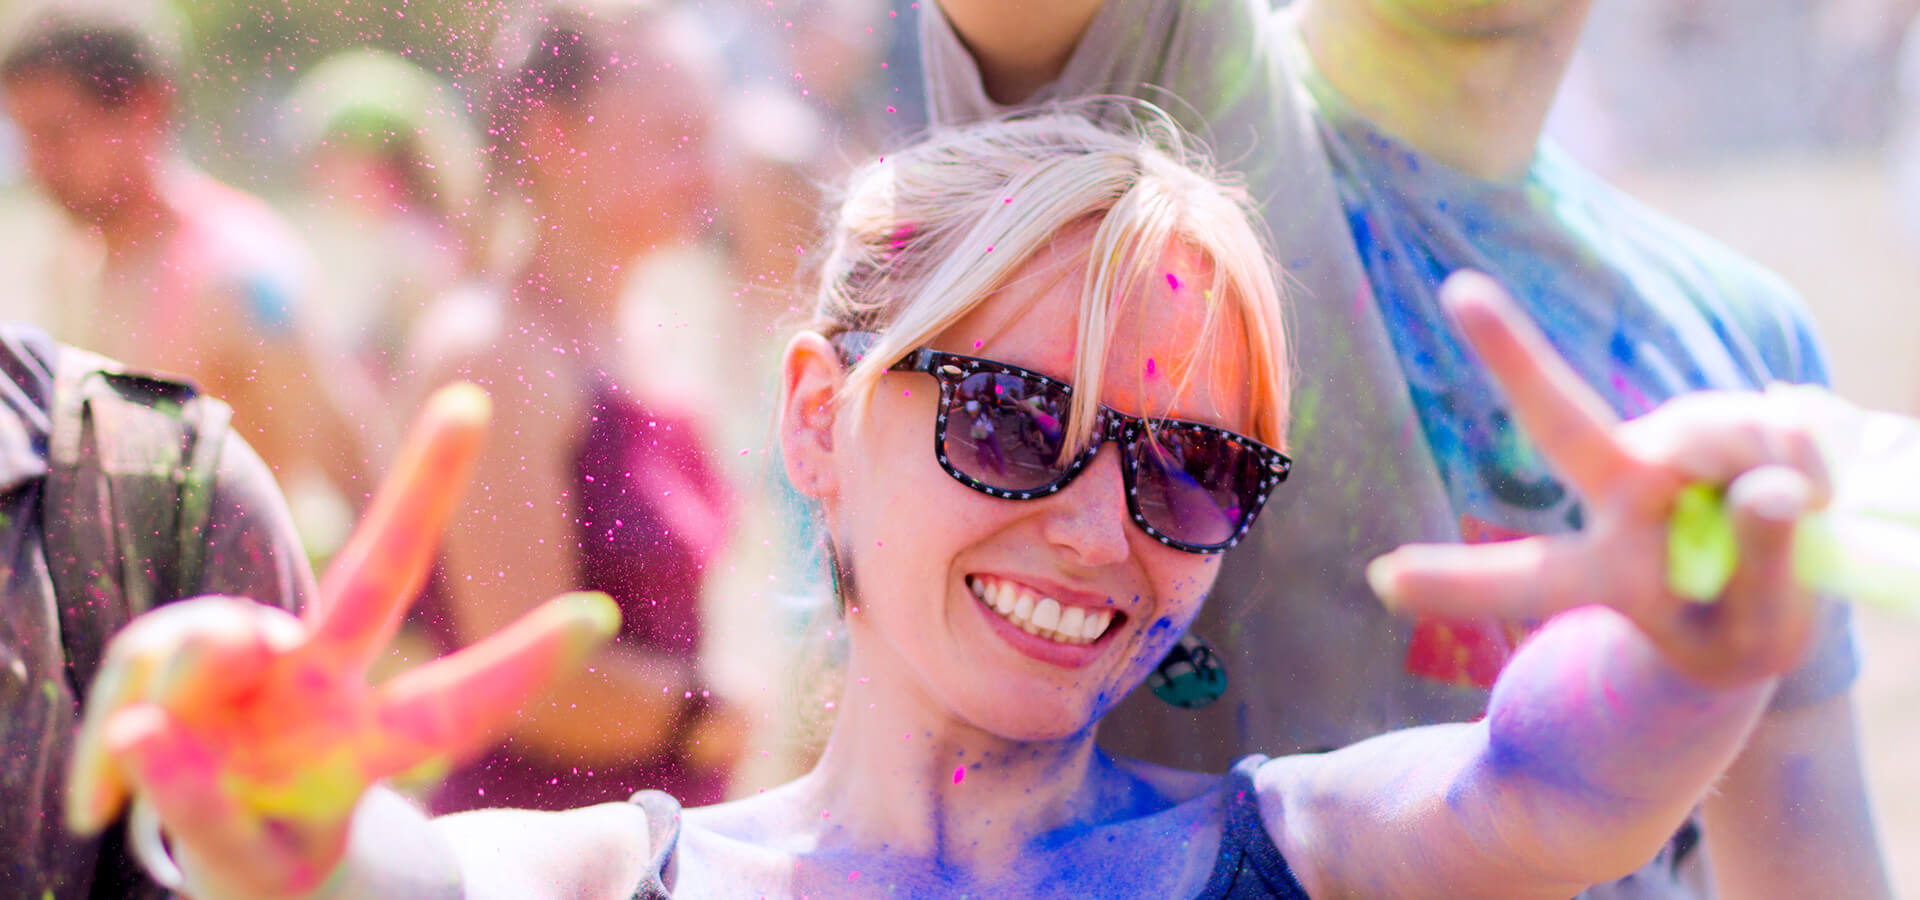 Smiling Woman in Sunglasses and Covered in Paint